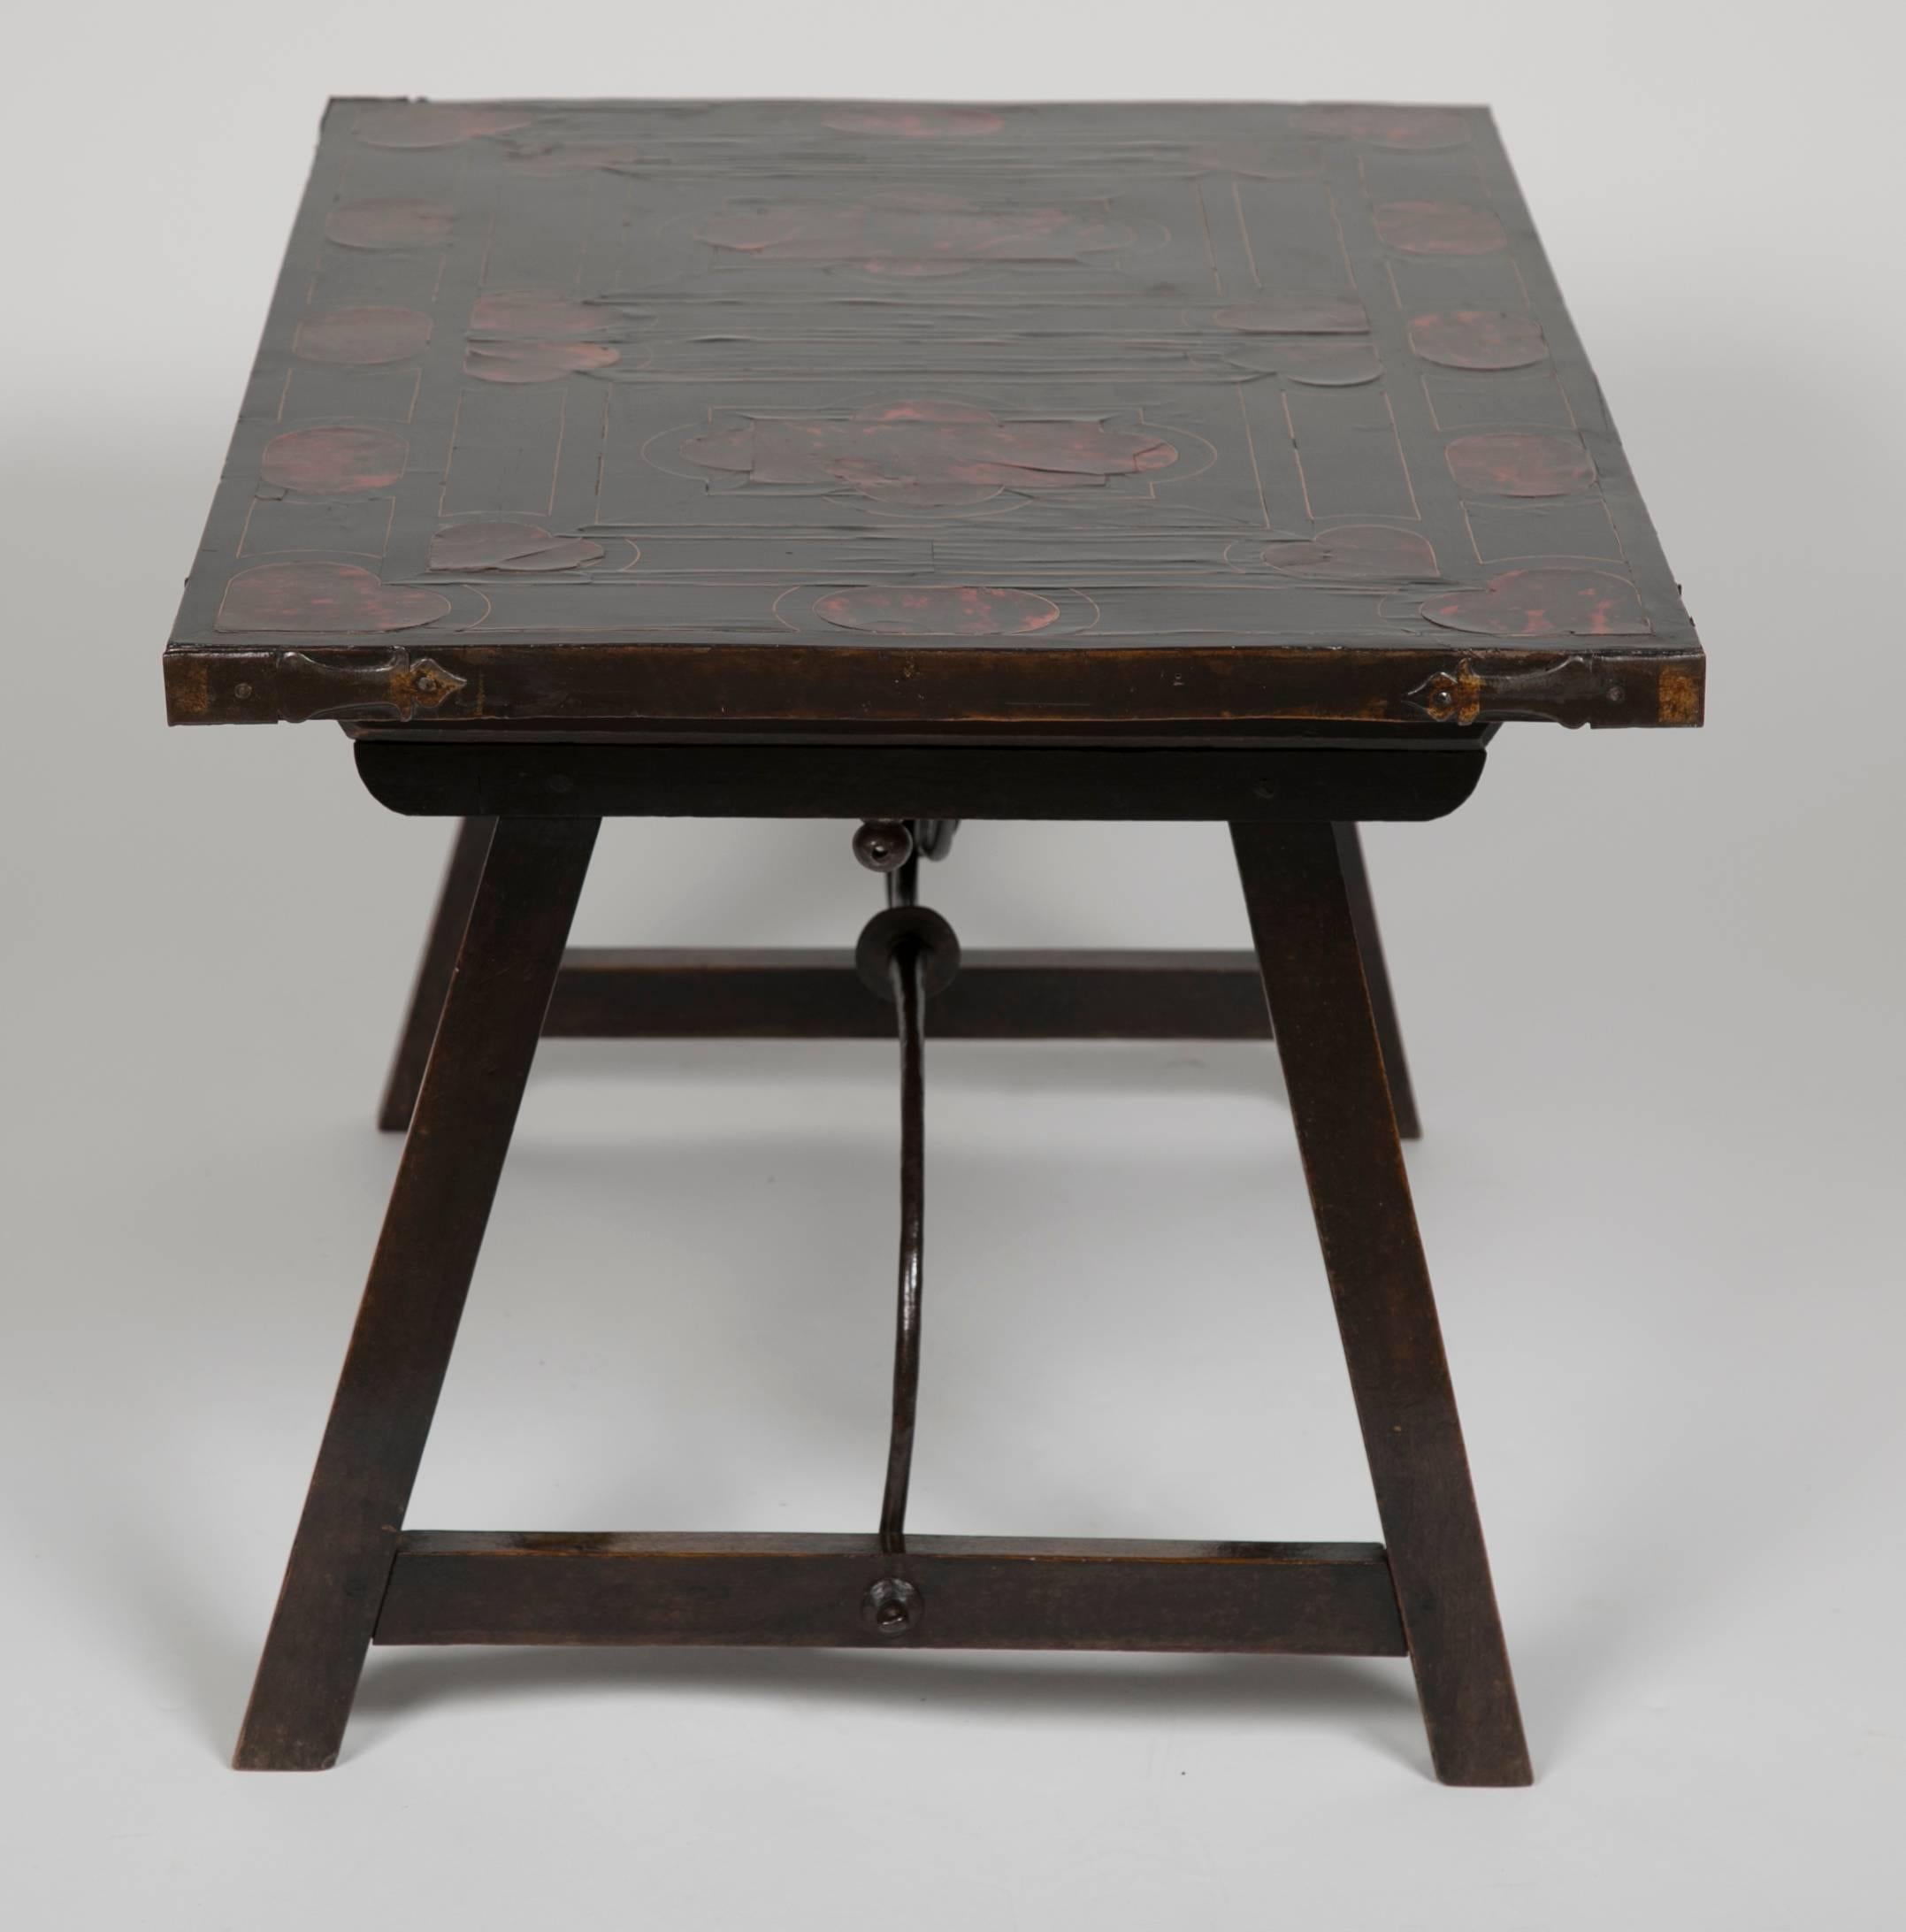 18th century Spanish Baroque low side table with rosewood and tortoiseshell inlaid top, with wrought iron stretchers. 